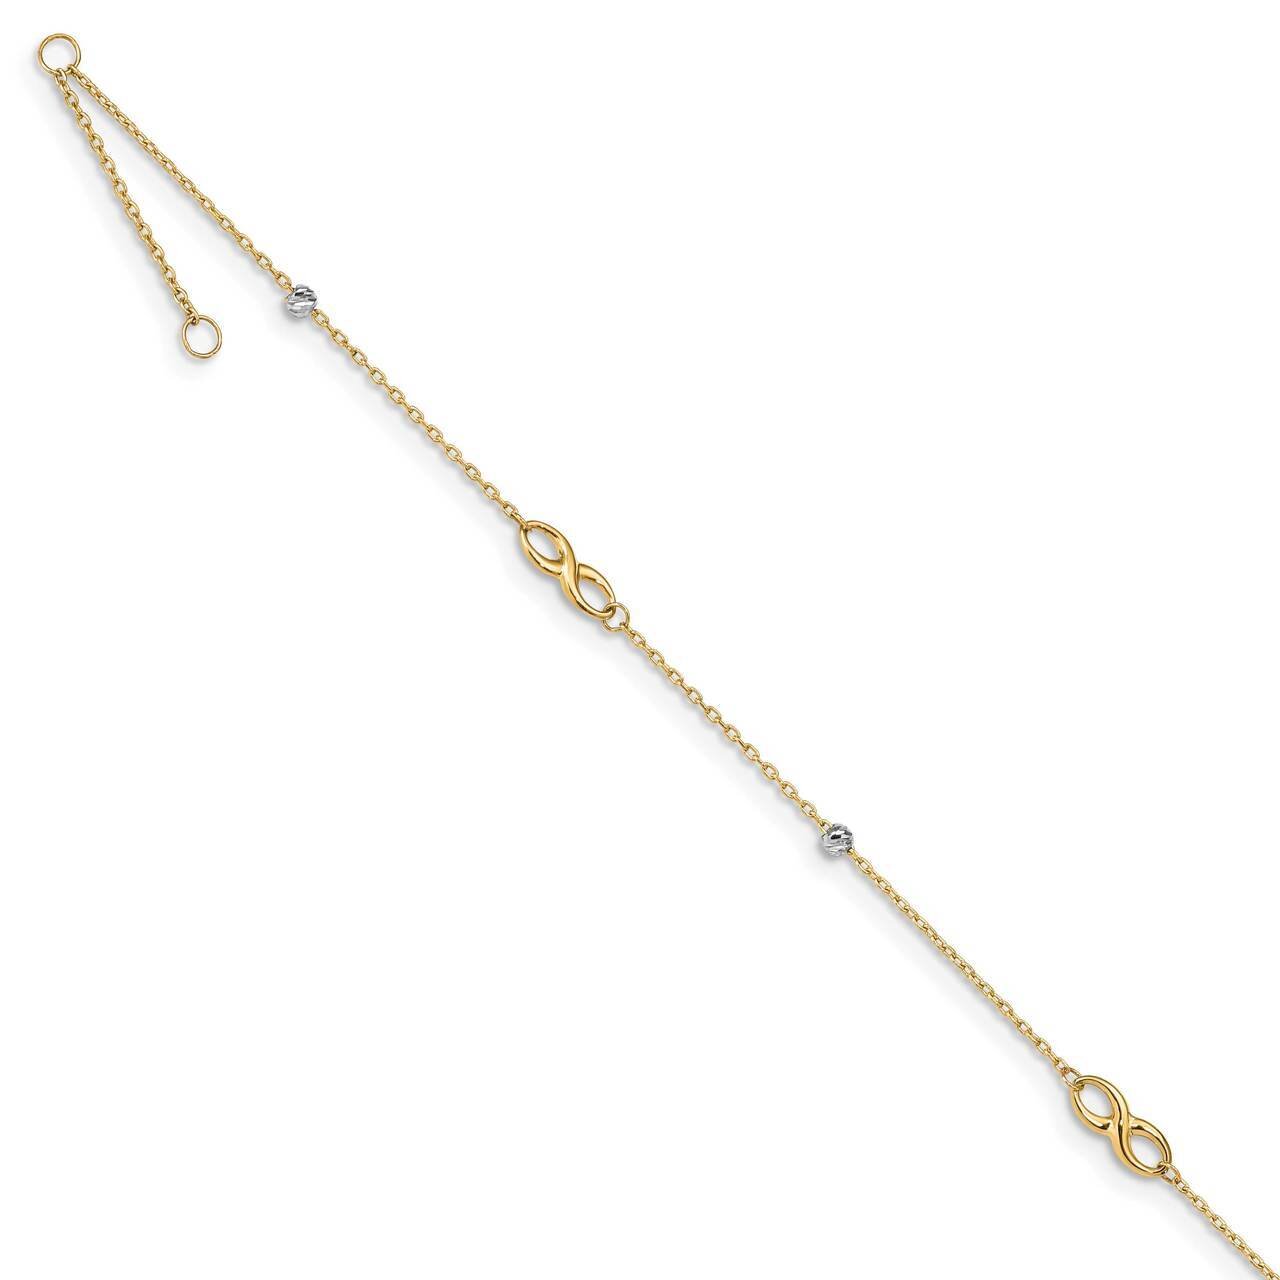 Beads & Infinity with 1 inch Extender Anklet 14k Two-Tone Gold Diamond-cut ANK301-10